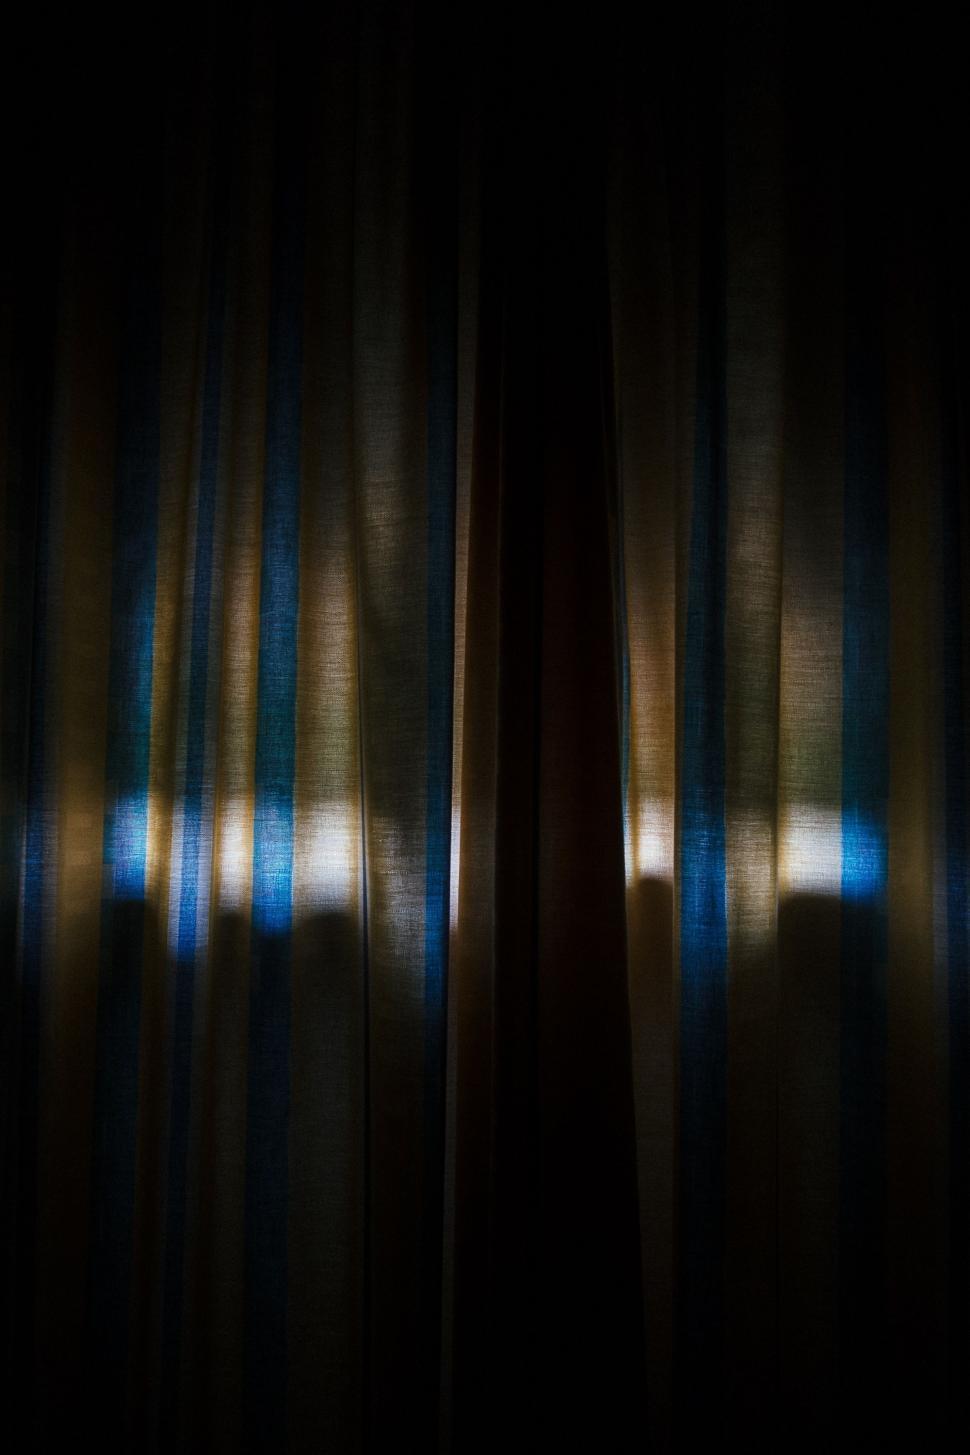 Free Image of Blurry Photo of a Curtain in the Dark 